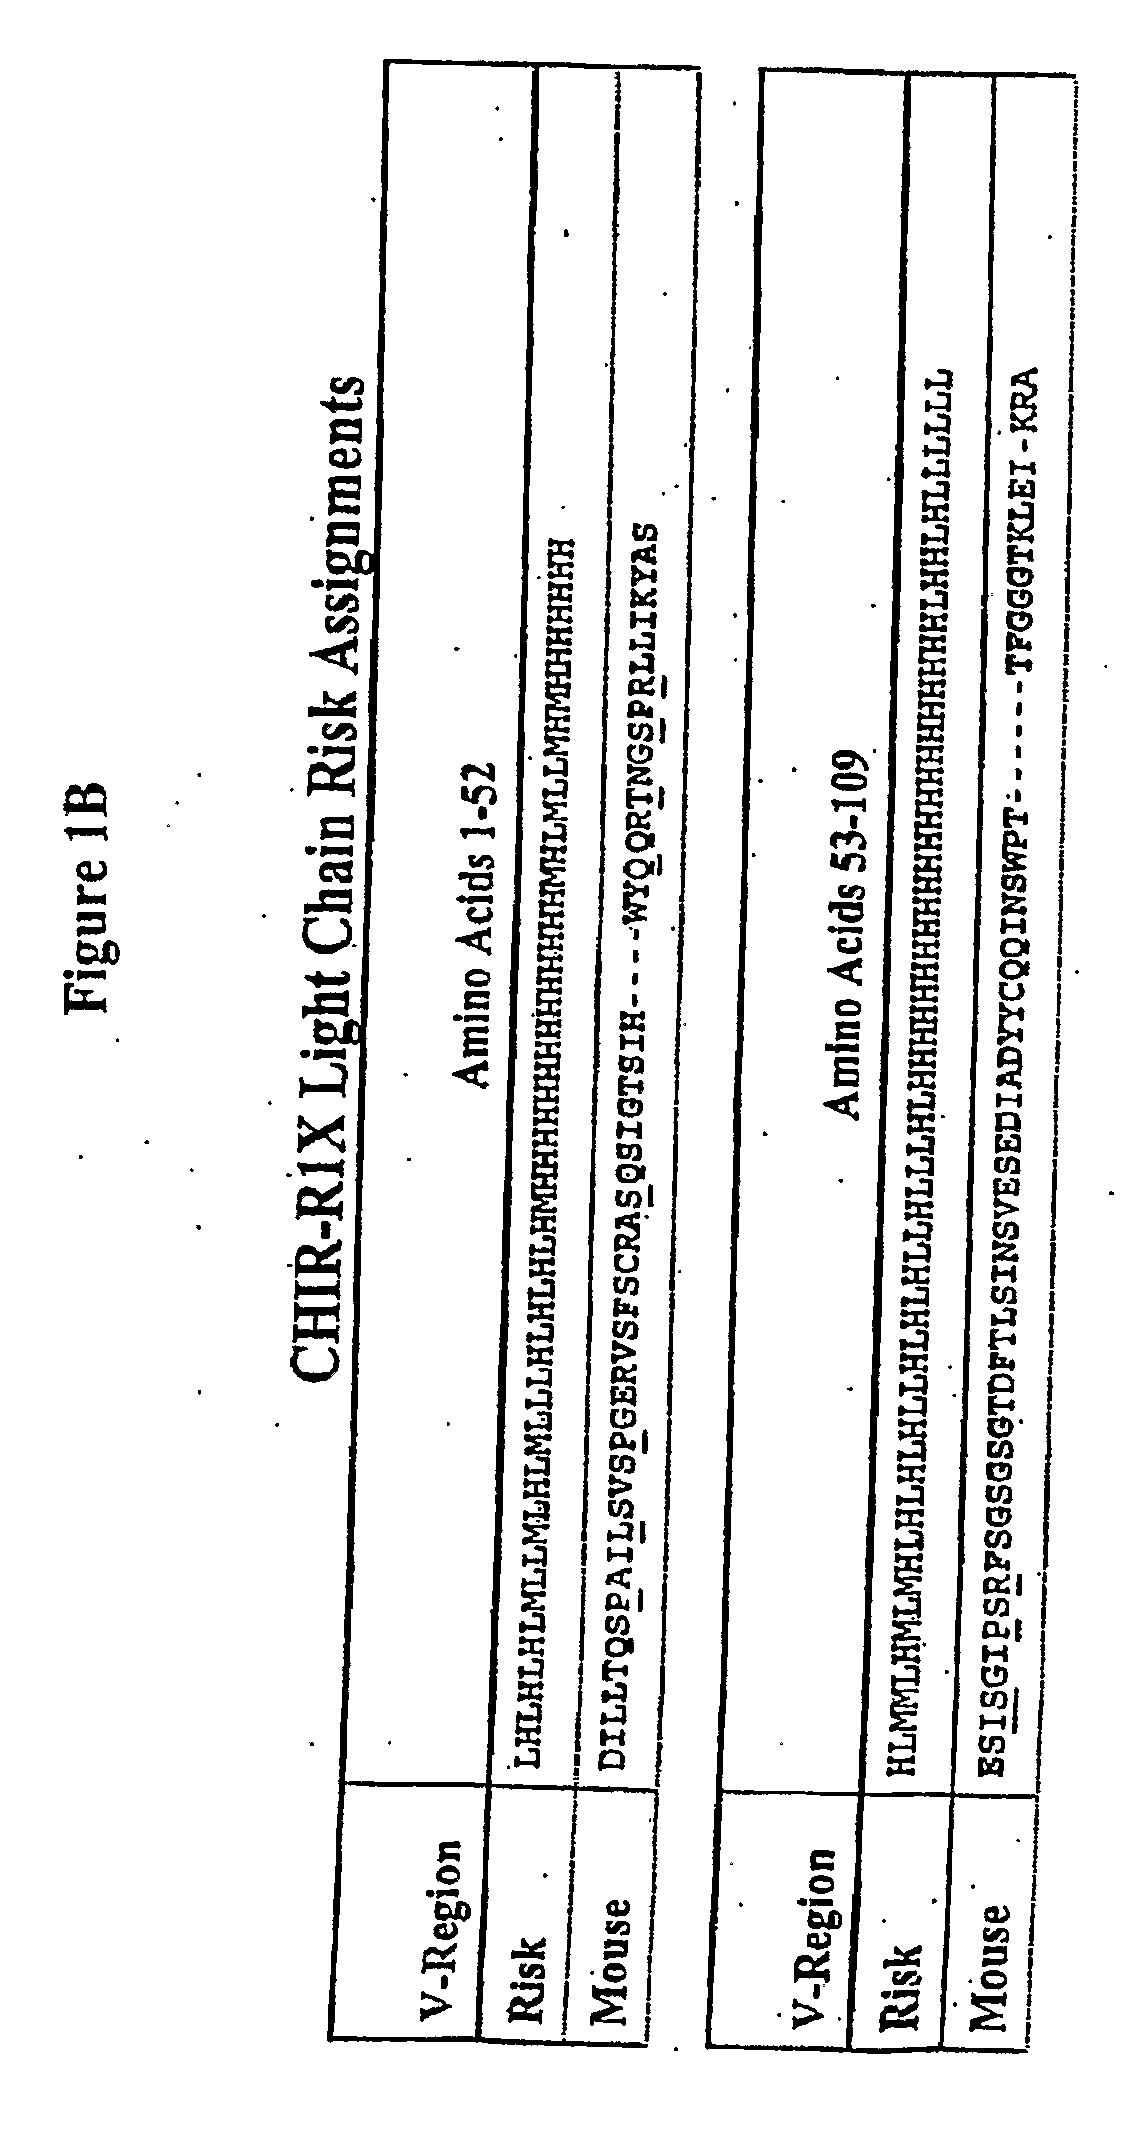 Methods for preventing and treating cancer metastasis and bone loss associated with cancer metastasis